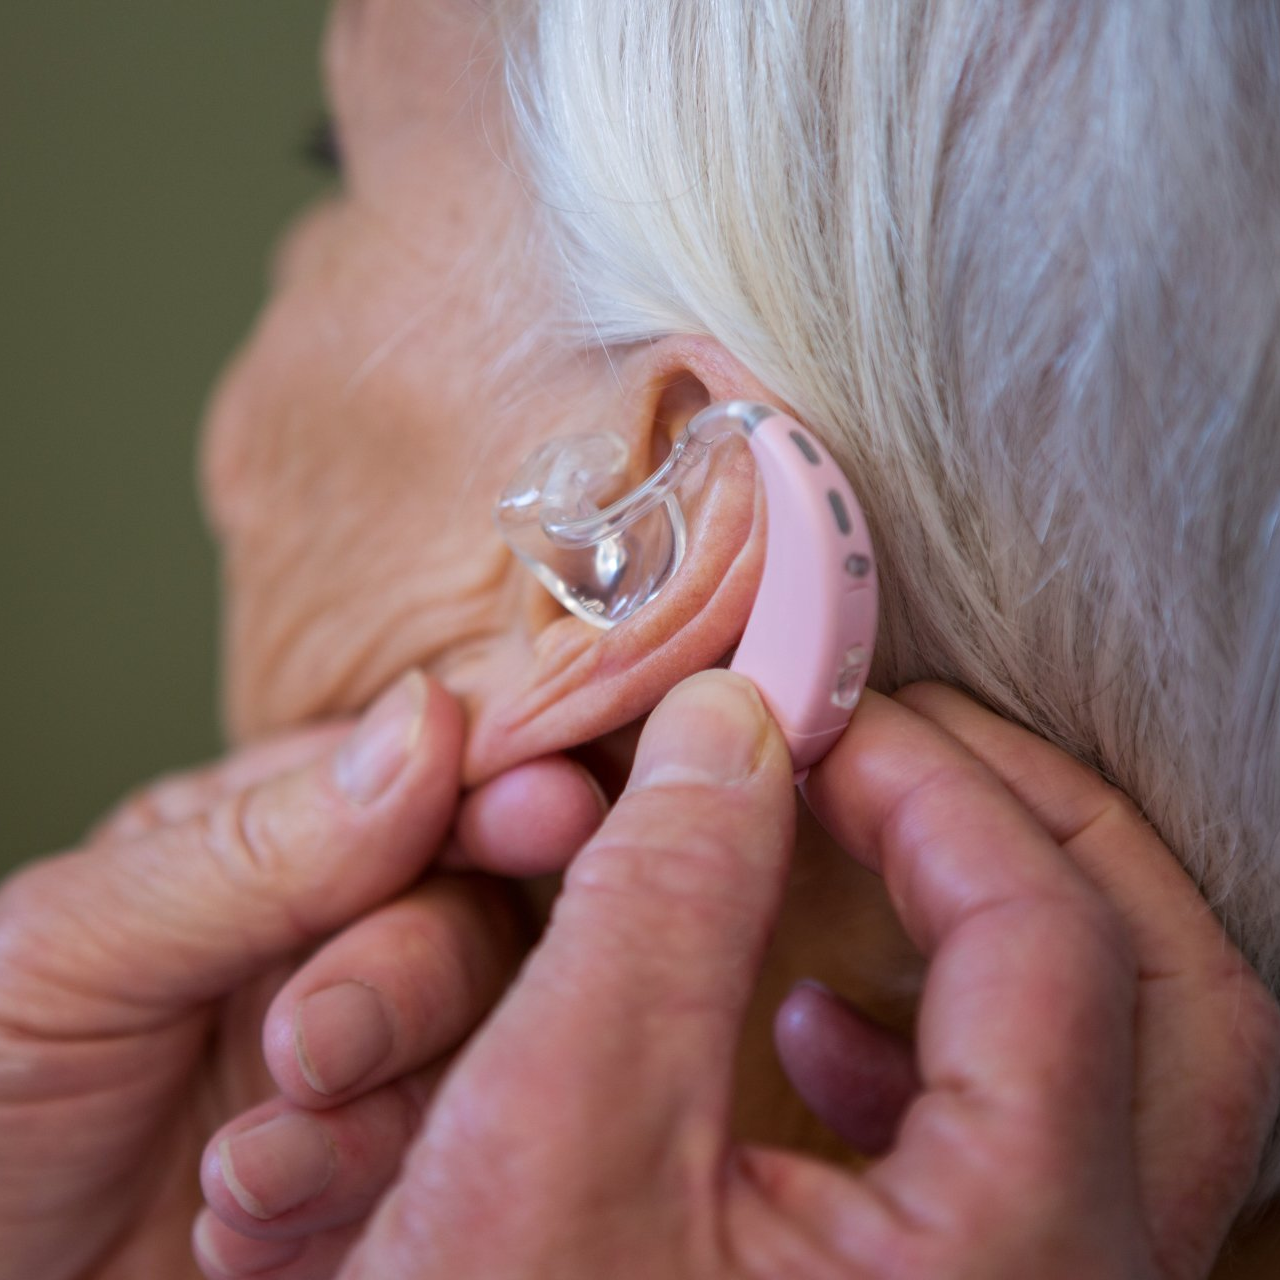 putting hearing aid to an old woman